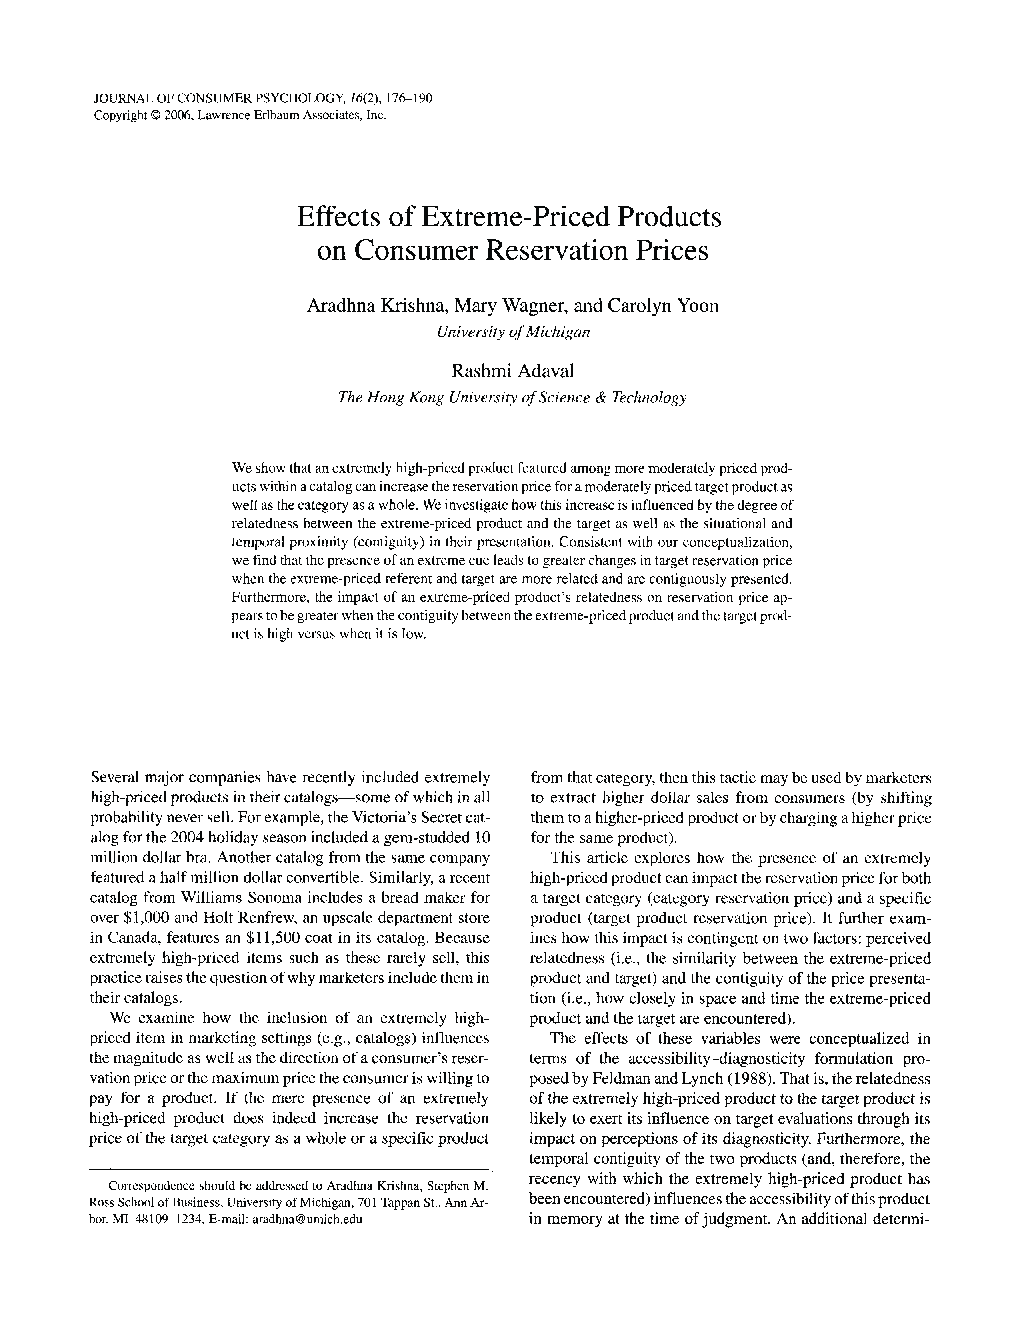 Effects of Extreme-Priced Products on Consumer Reservation Prices